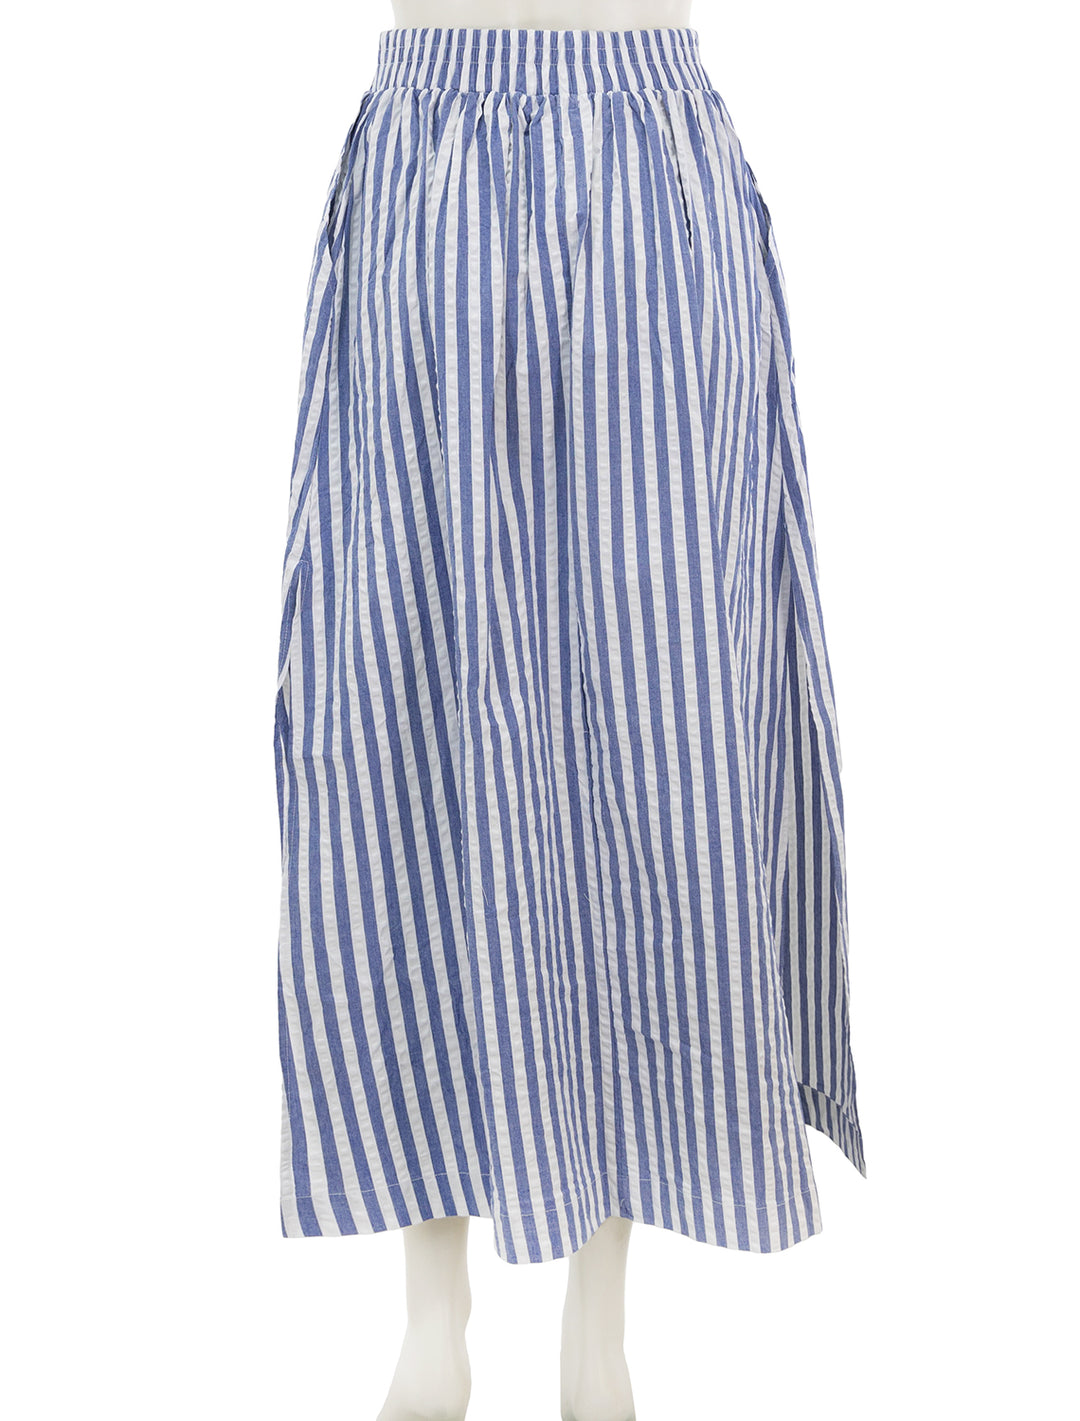 Back view of Stateside's puckered stripe double slit maxi skirt in navy stripe.